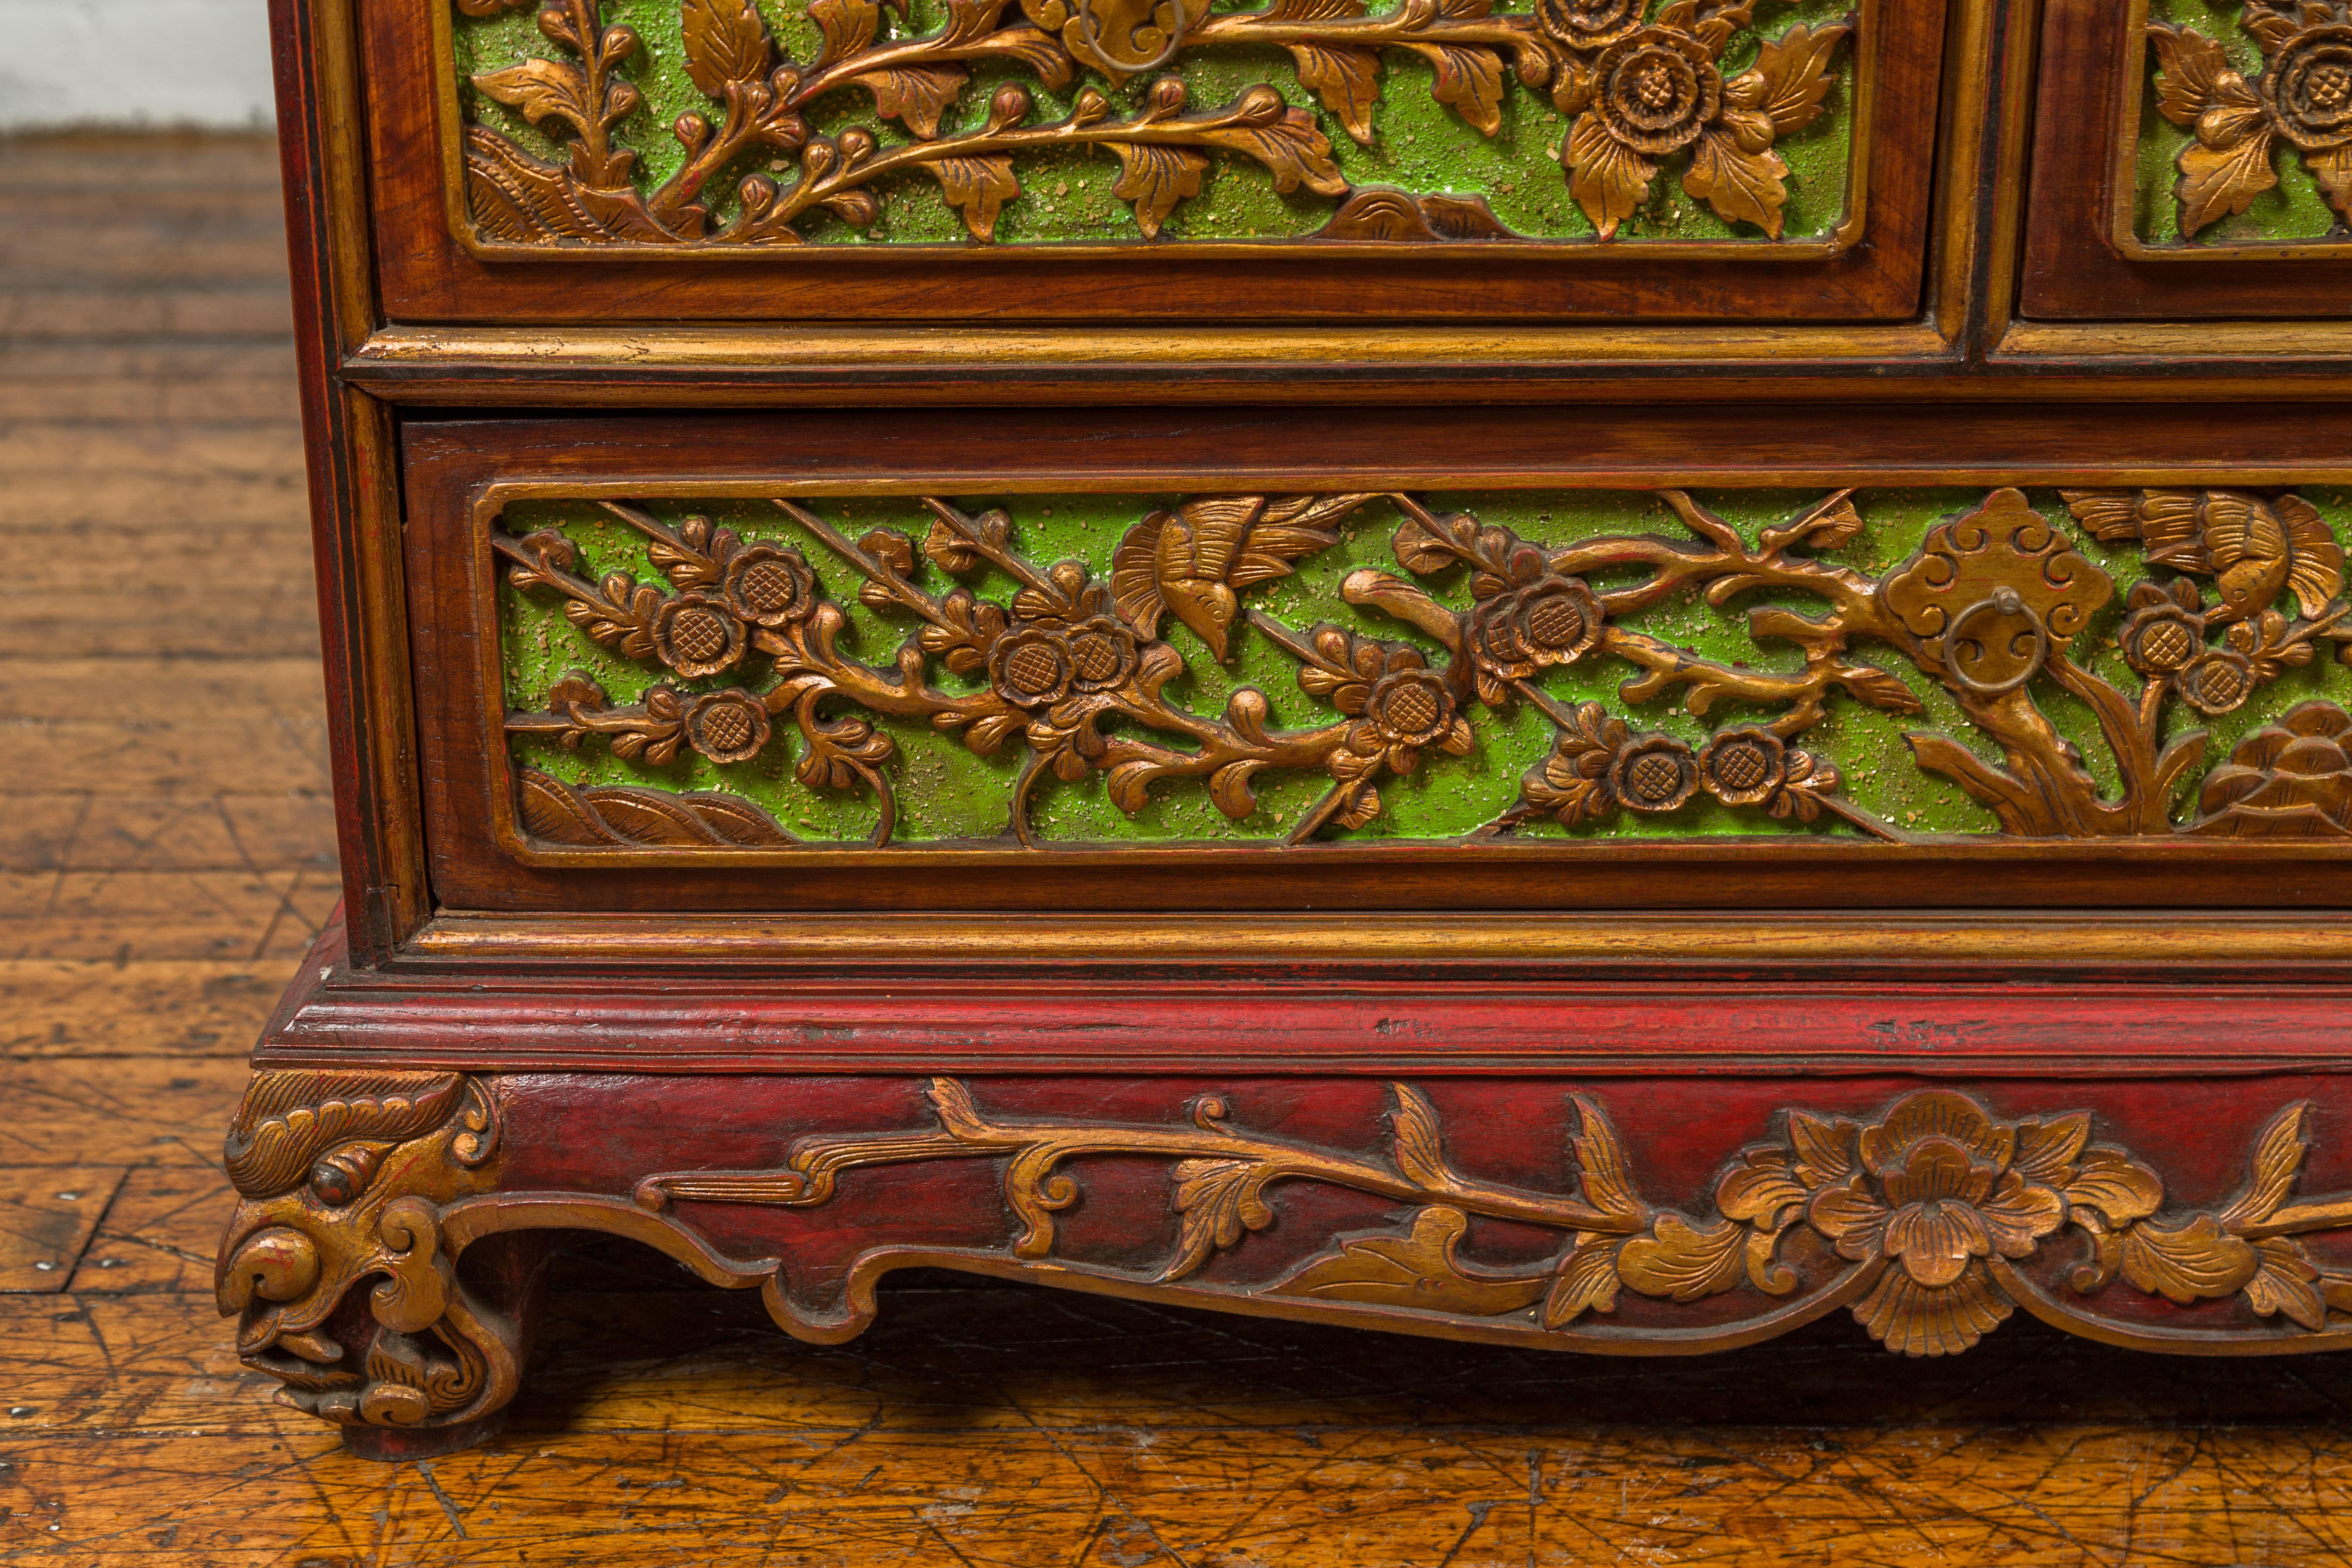 19th Century Madurese Polychrome Three-Drawer Dresser with Carved Floral Motifs In Good Condition For Sale In Yonkers, NY